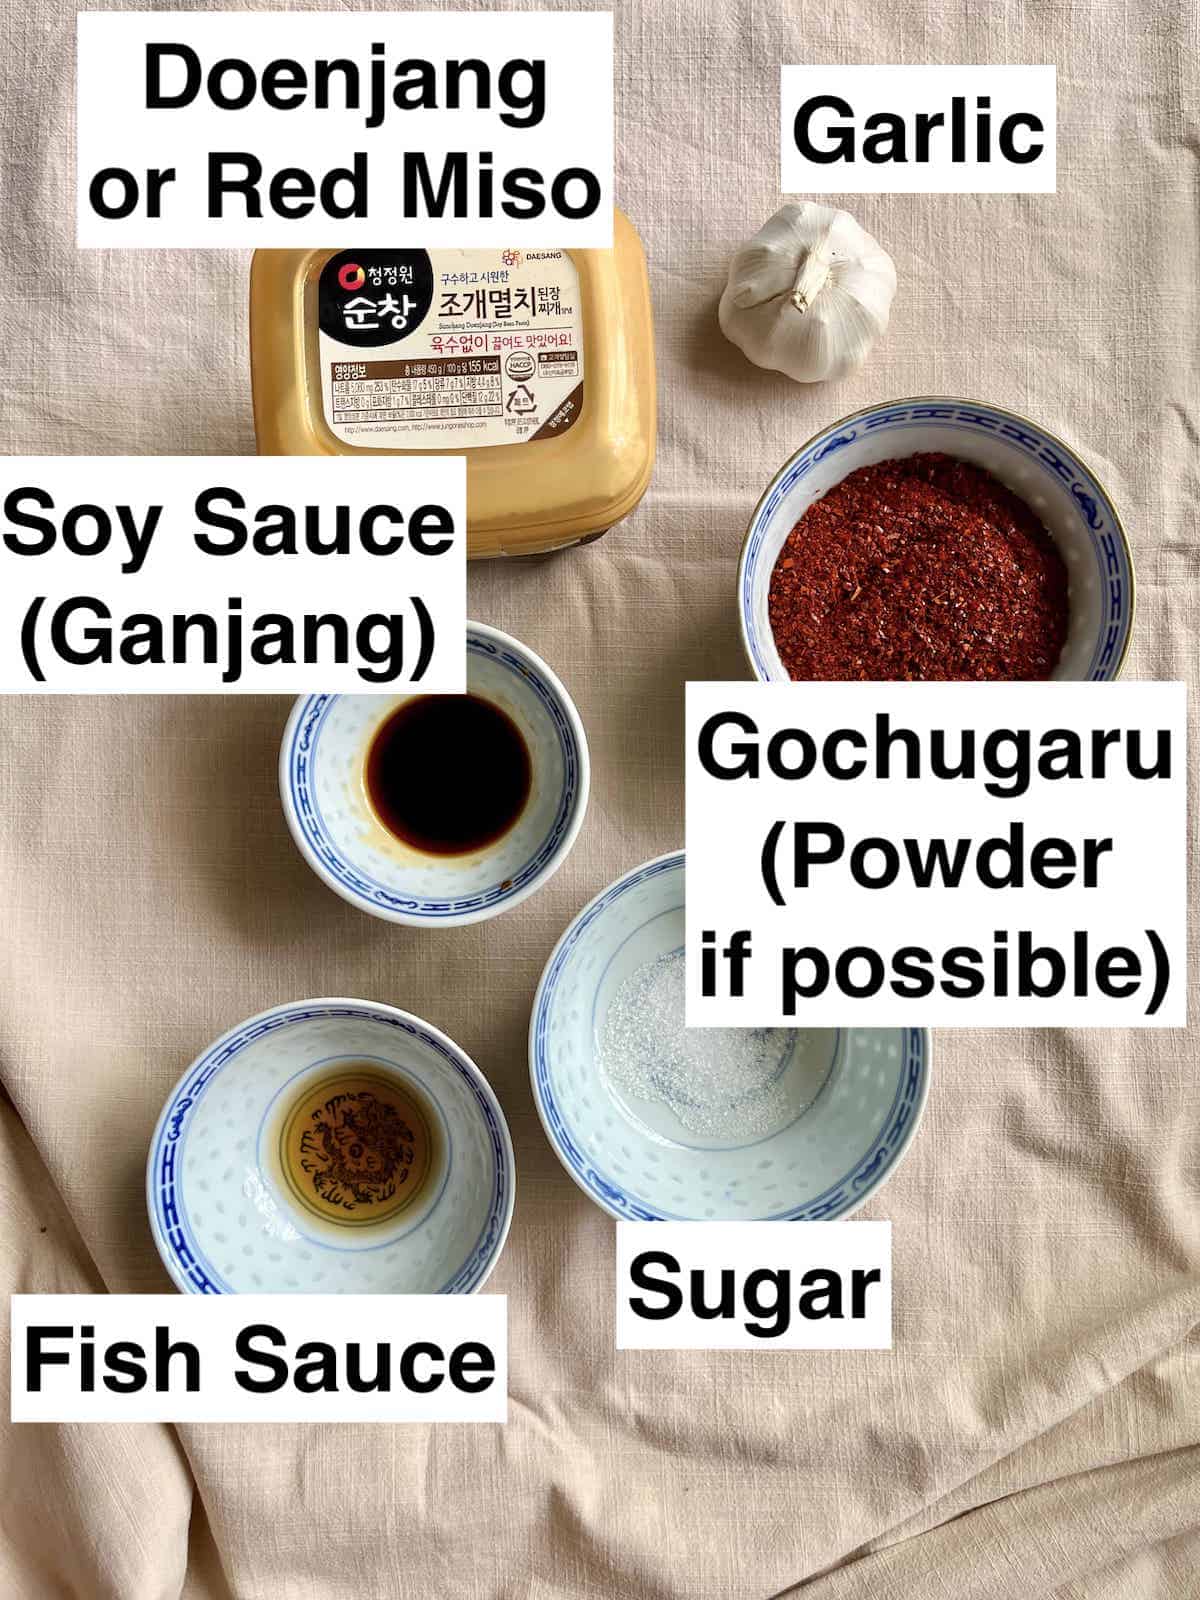 The ingredients to hack Gochujang next to each other.